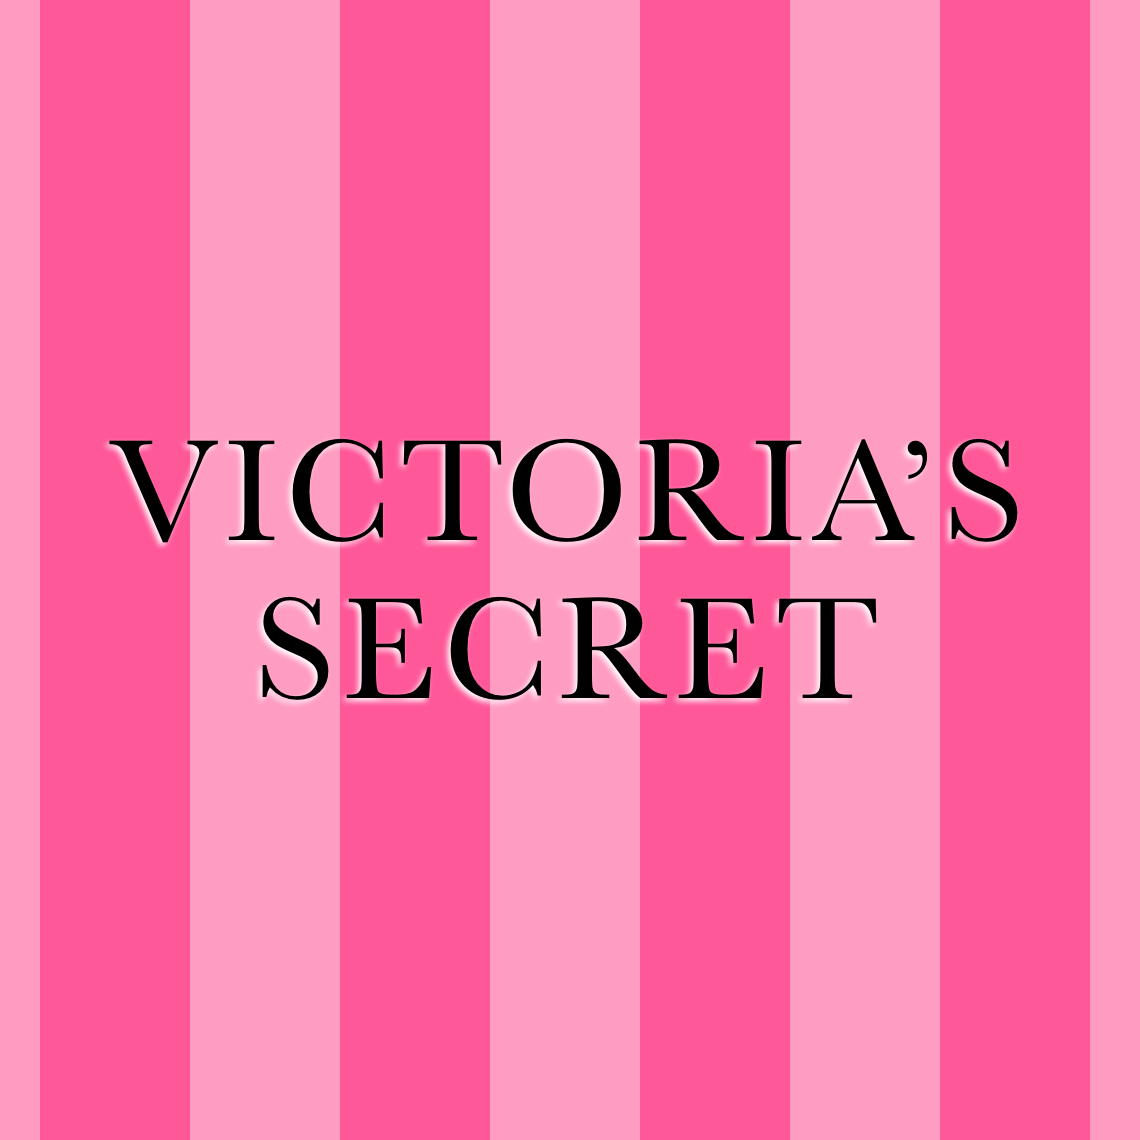 How to watch the 2018 Victoria's Secret Fashion Show ONLINE!